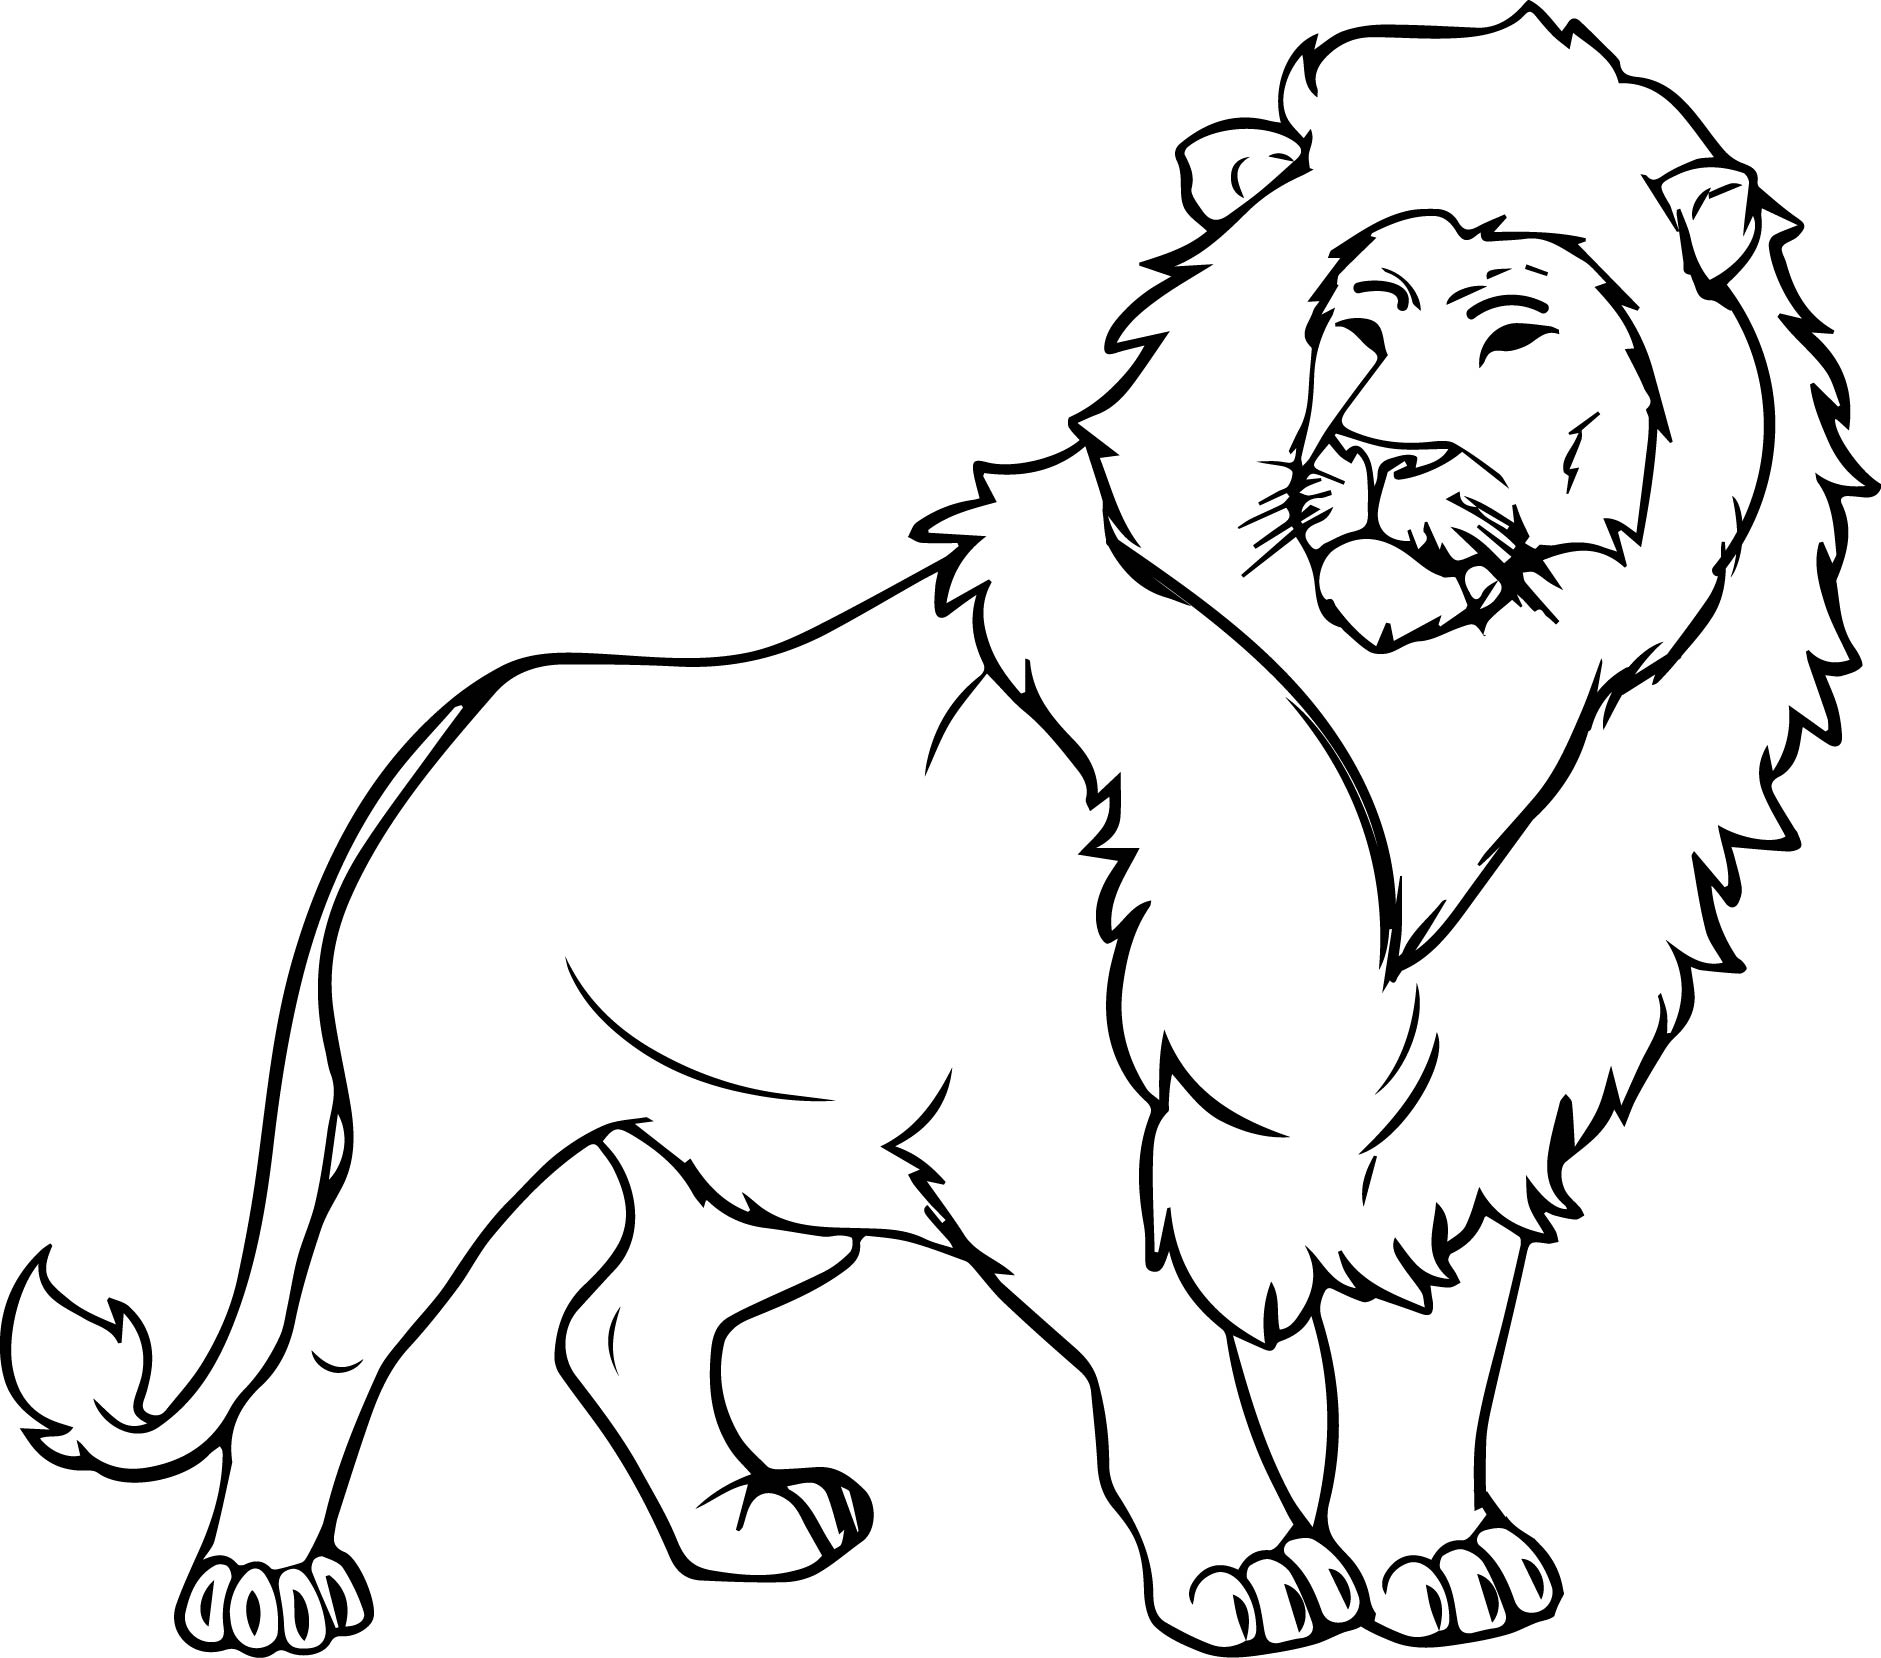 Realistic Lion Coloring Pages at GetColorings.com | Free printable